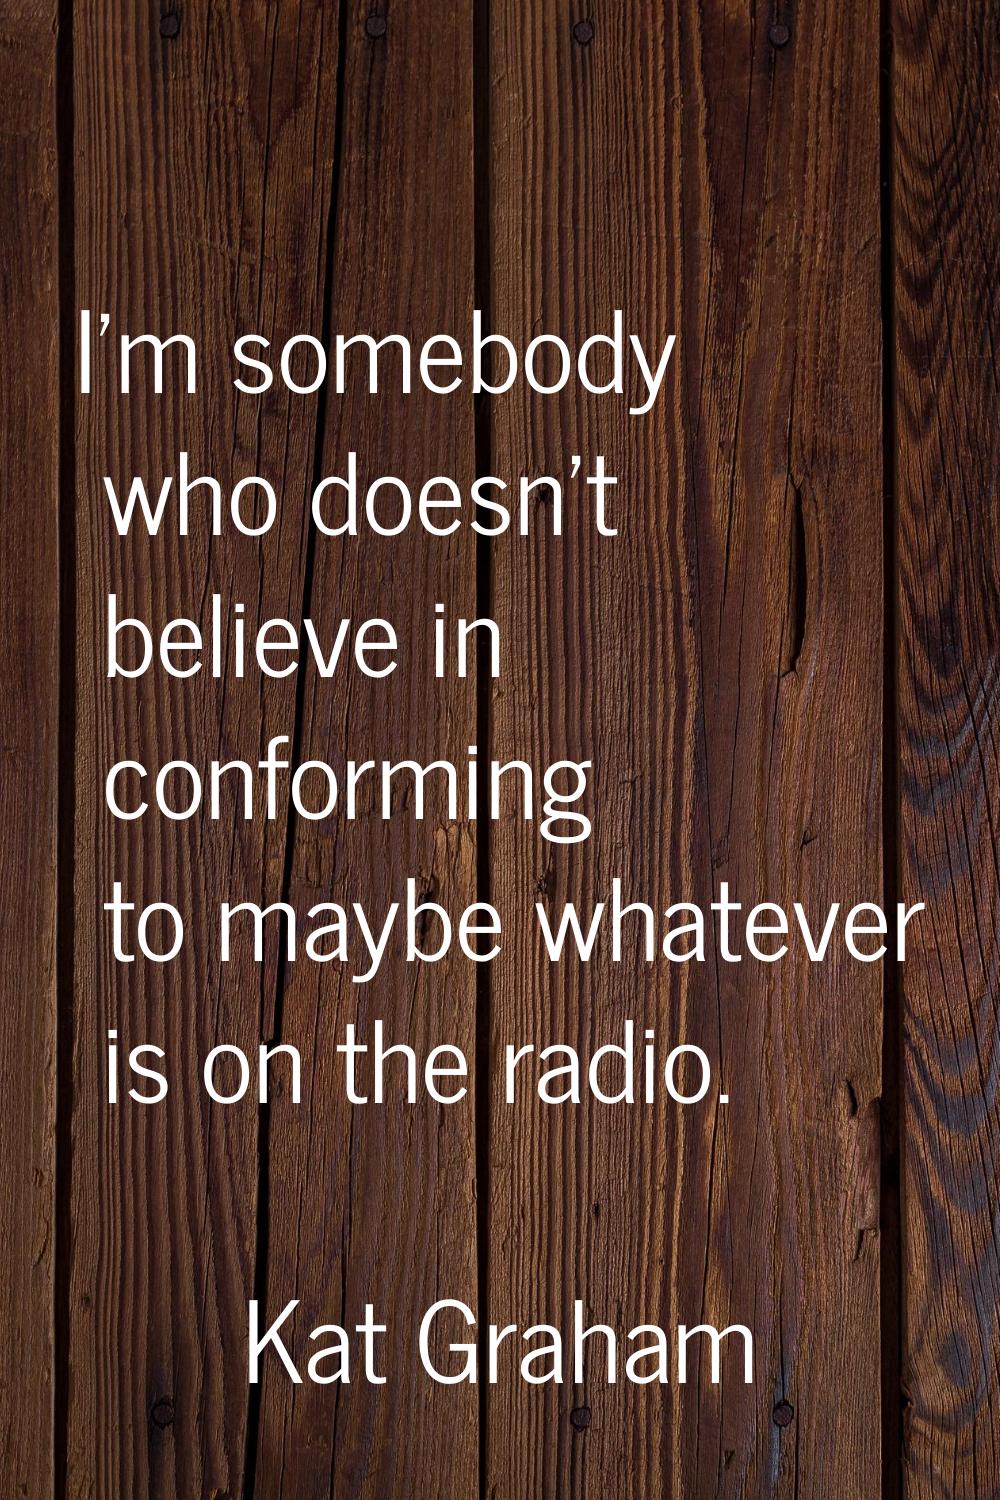 I'm somebody who doesn't believe in conforming to maybe whatever is on the radio.